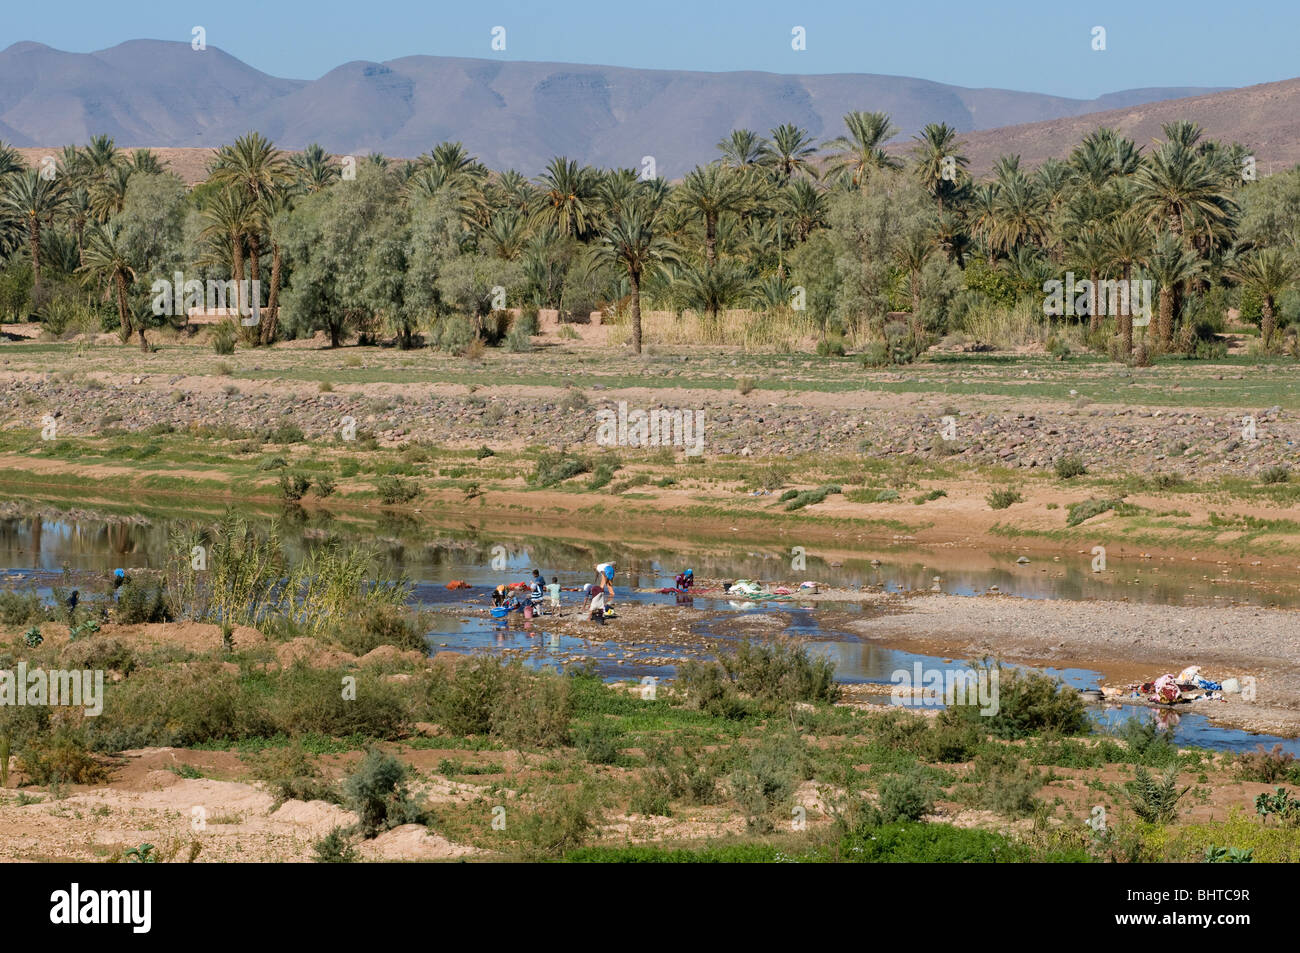 People washing clothes in a river near the fortress of Ait Benhaddou, Morocco Stock Photo